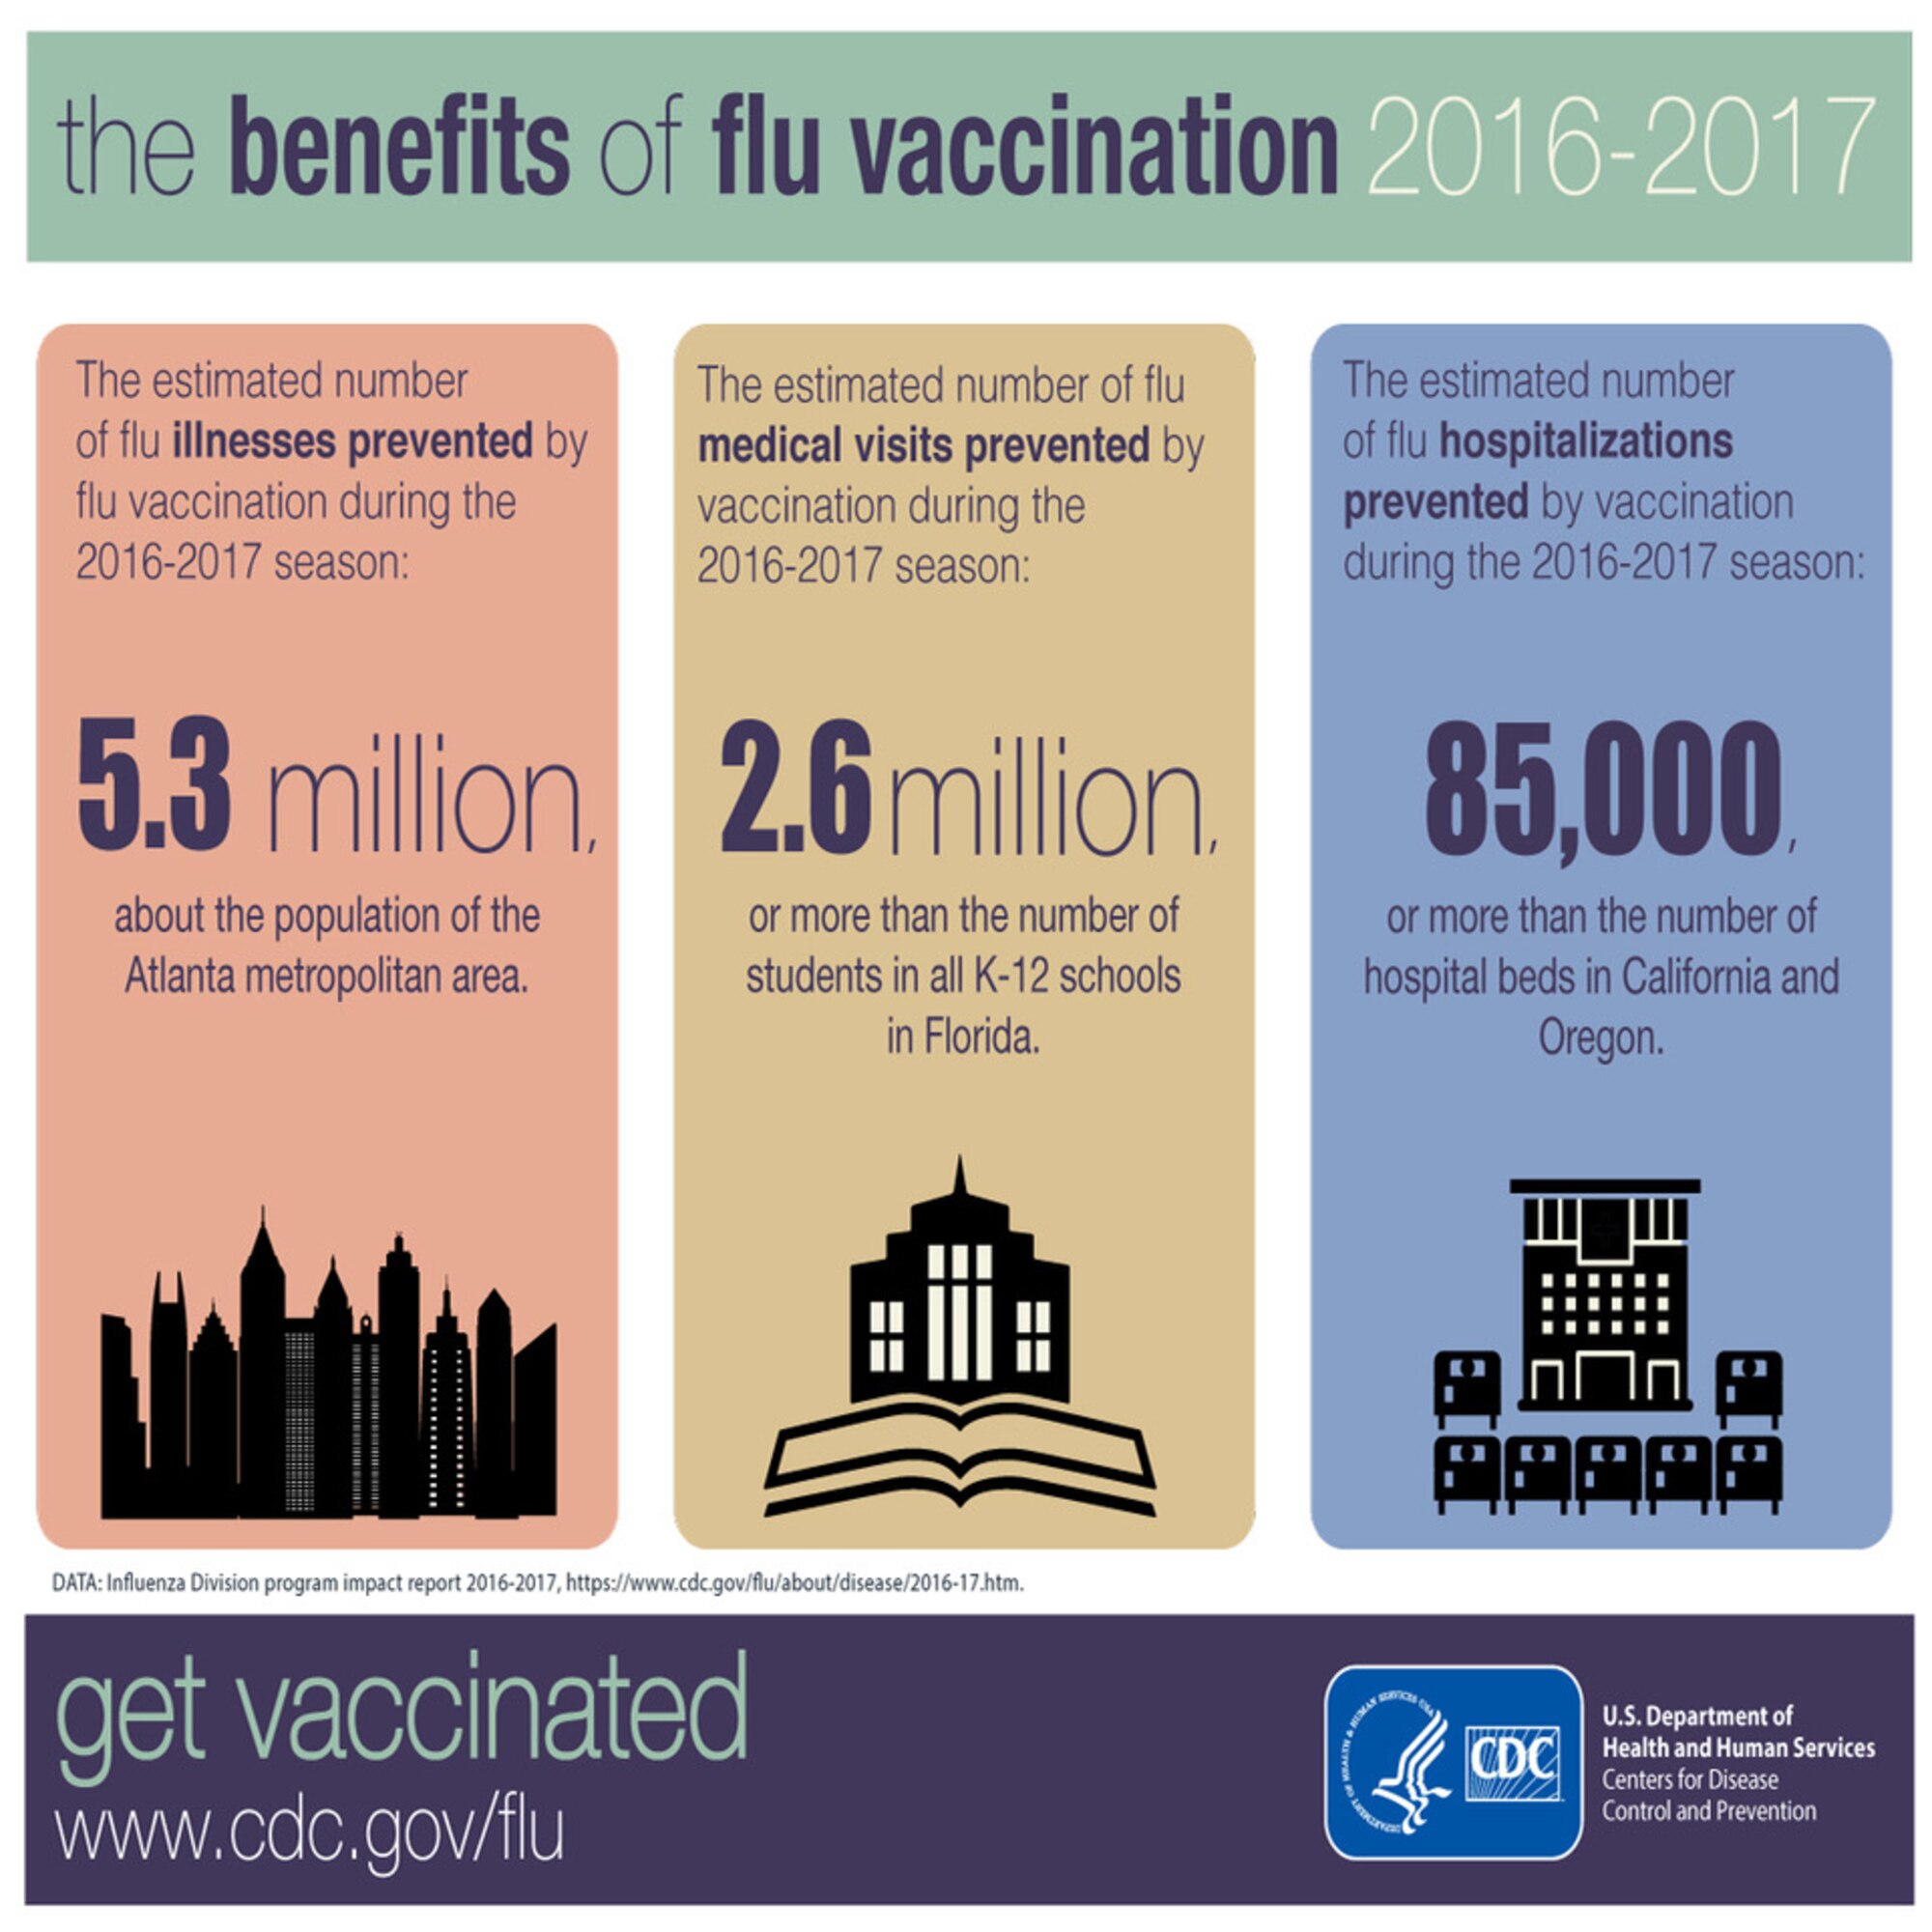 The flu vaccine is a preventative measure that many individuals take. It was estimated to prevent 5.3 million flu illnesses, 2.6 million flu medical visits and 85,000 flu hospitalizations in the 2016-2017 season. (Photo courtesy of Center for Disease Control)